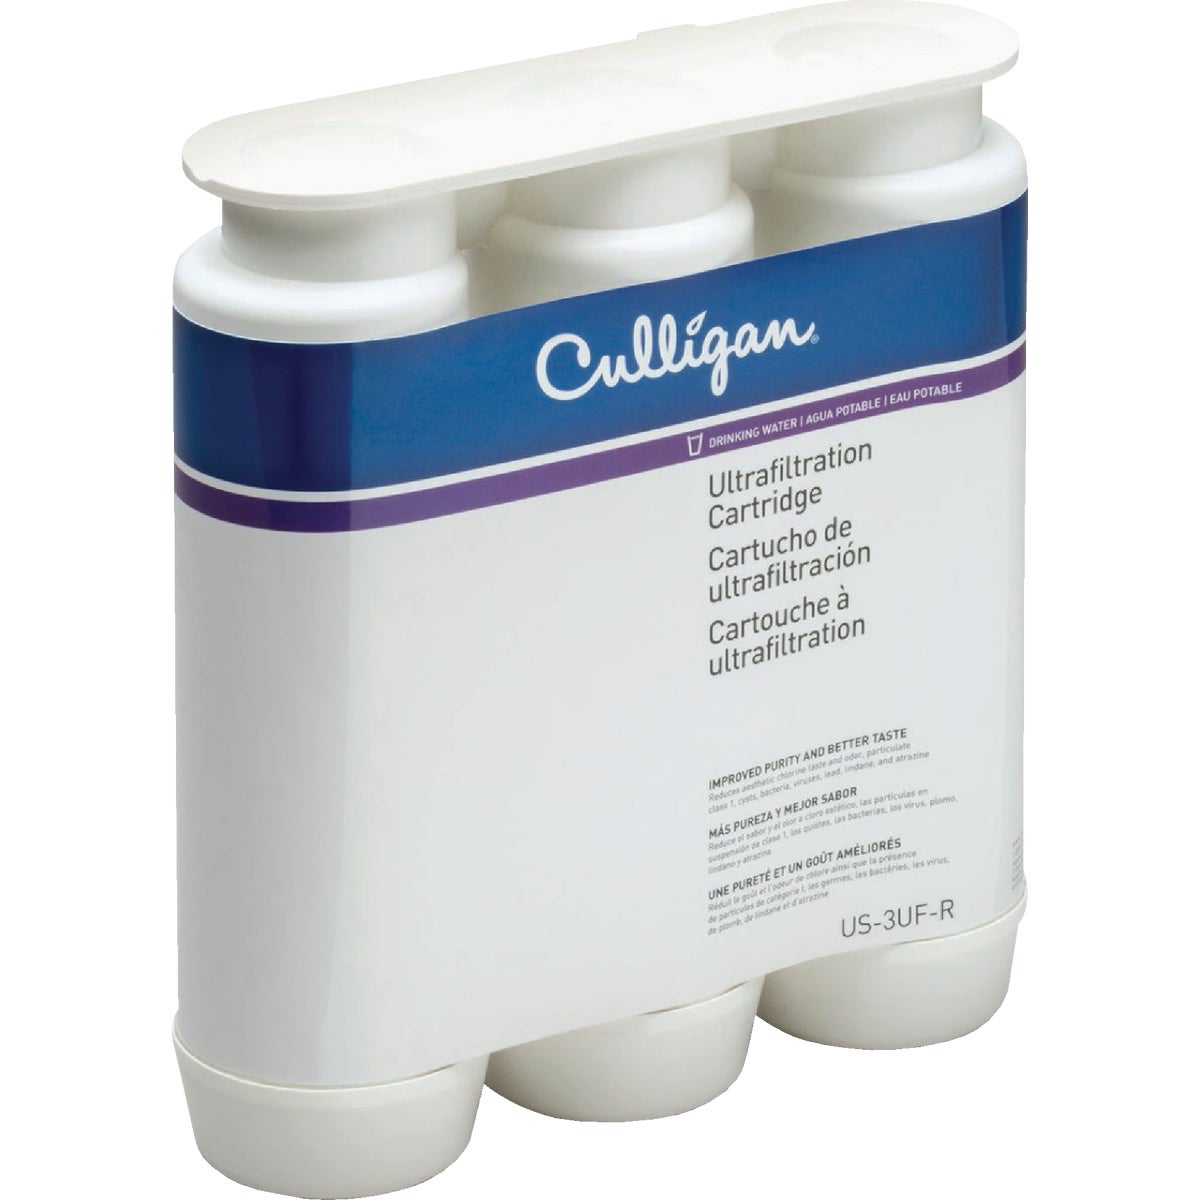 Culligan US-3UF-R Under Sink Drinking Water Ultra Filtration Replacement Cartridge